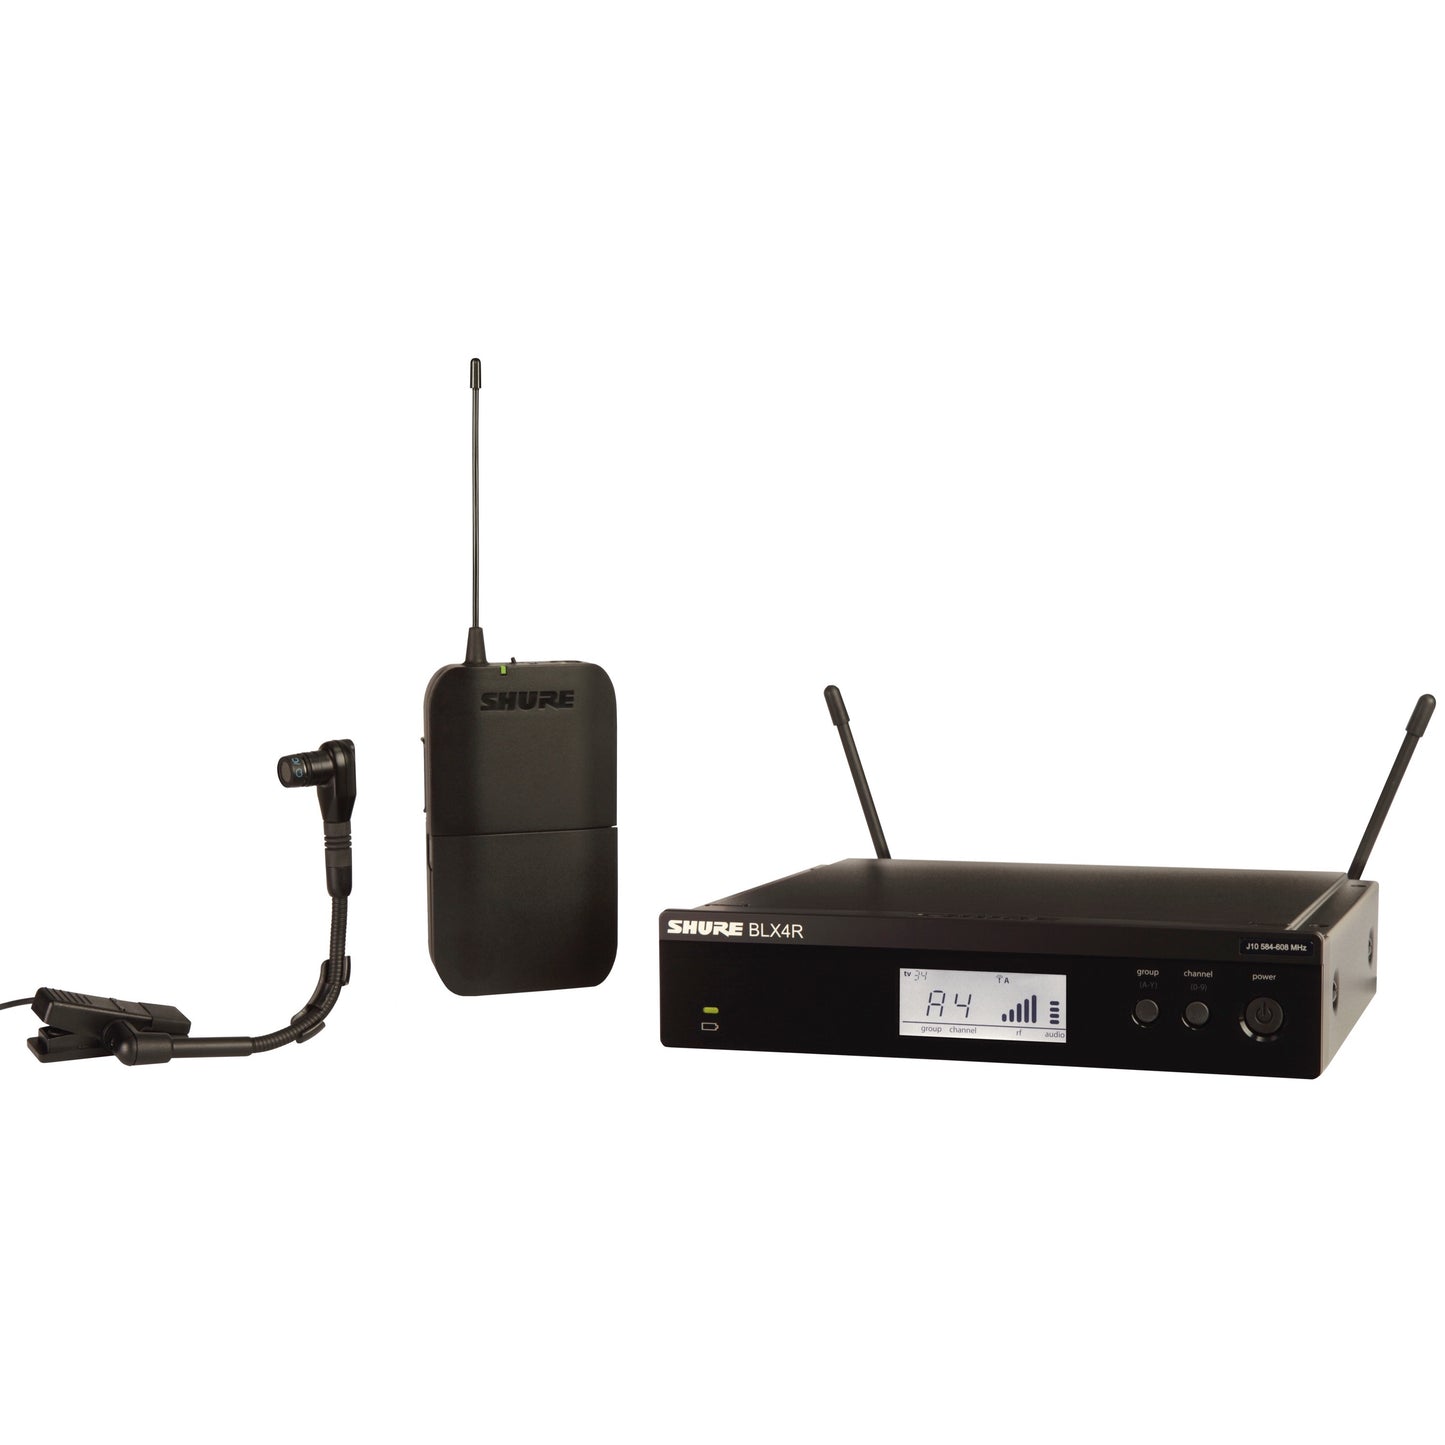 Shure BLX14R/B98 Wireless Instrument Microphone System, Band H9 (512-542 MHz)